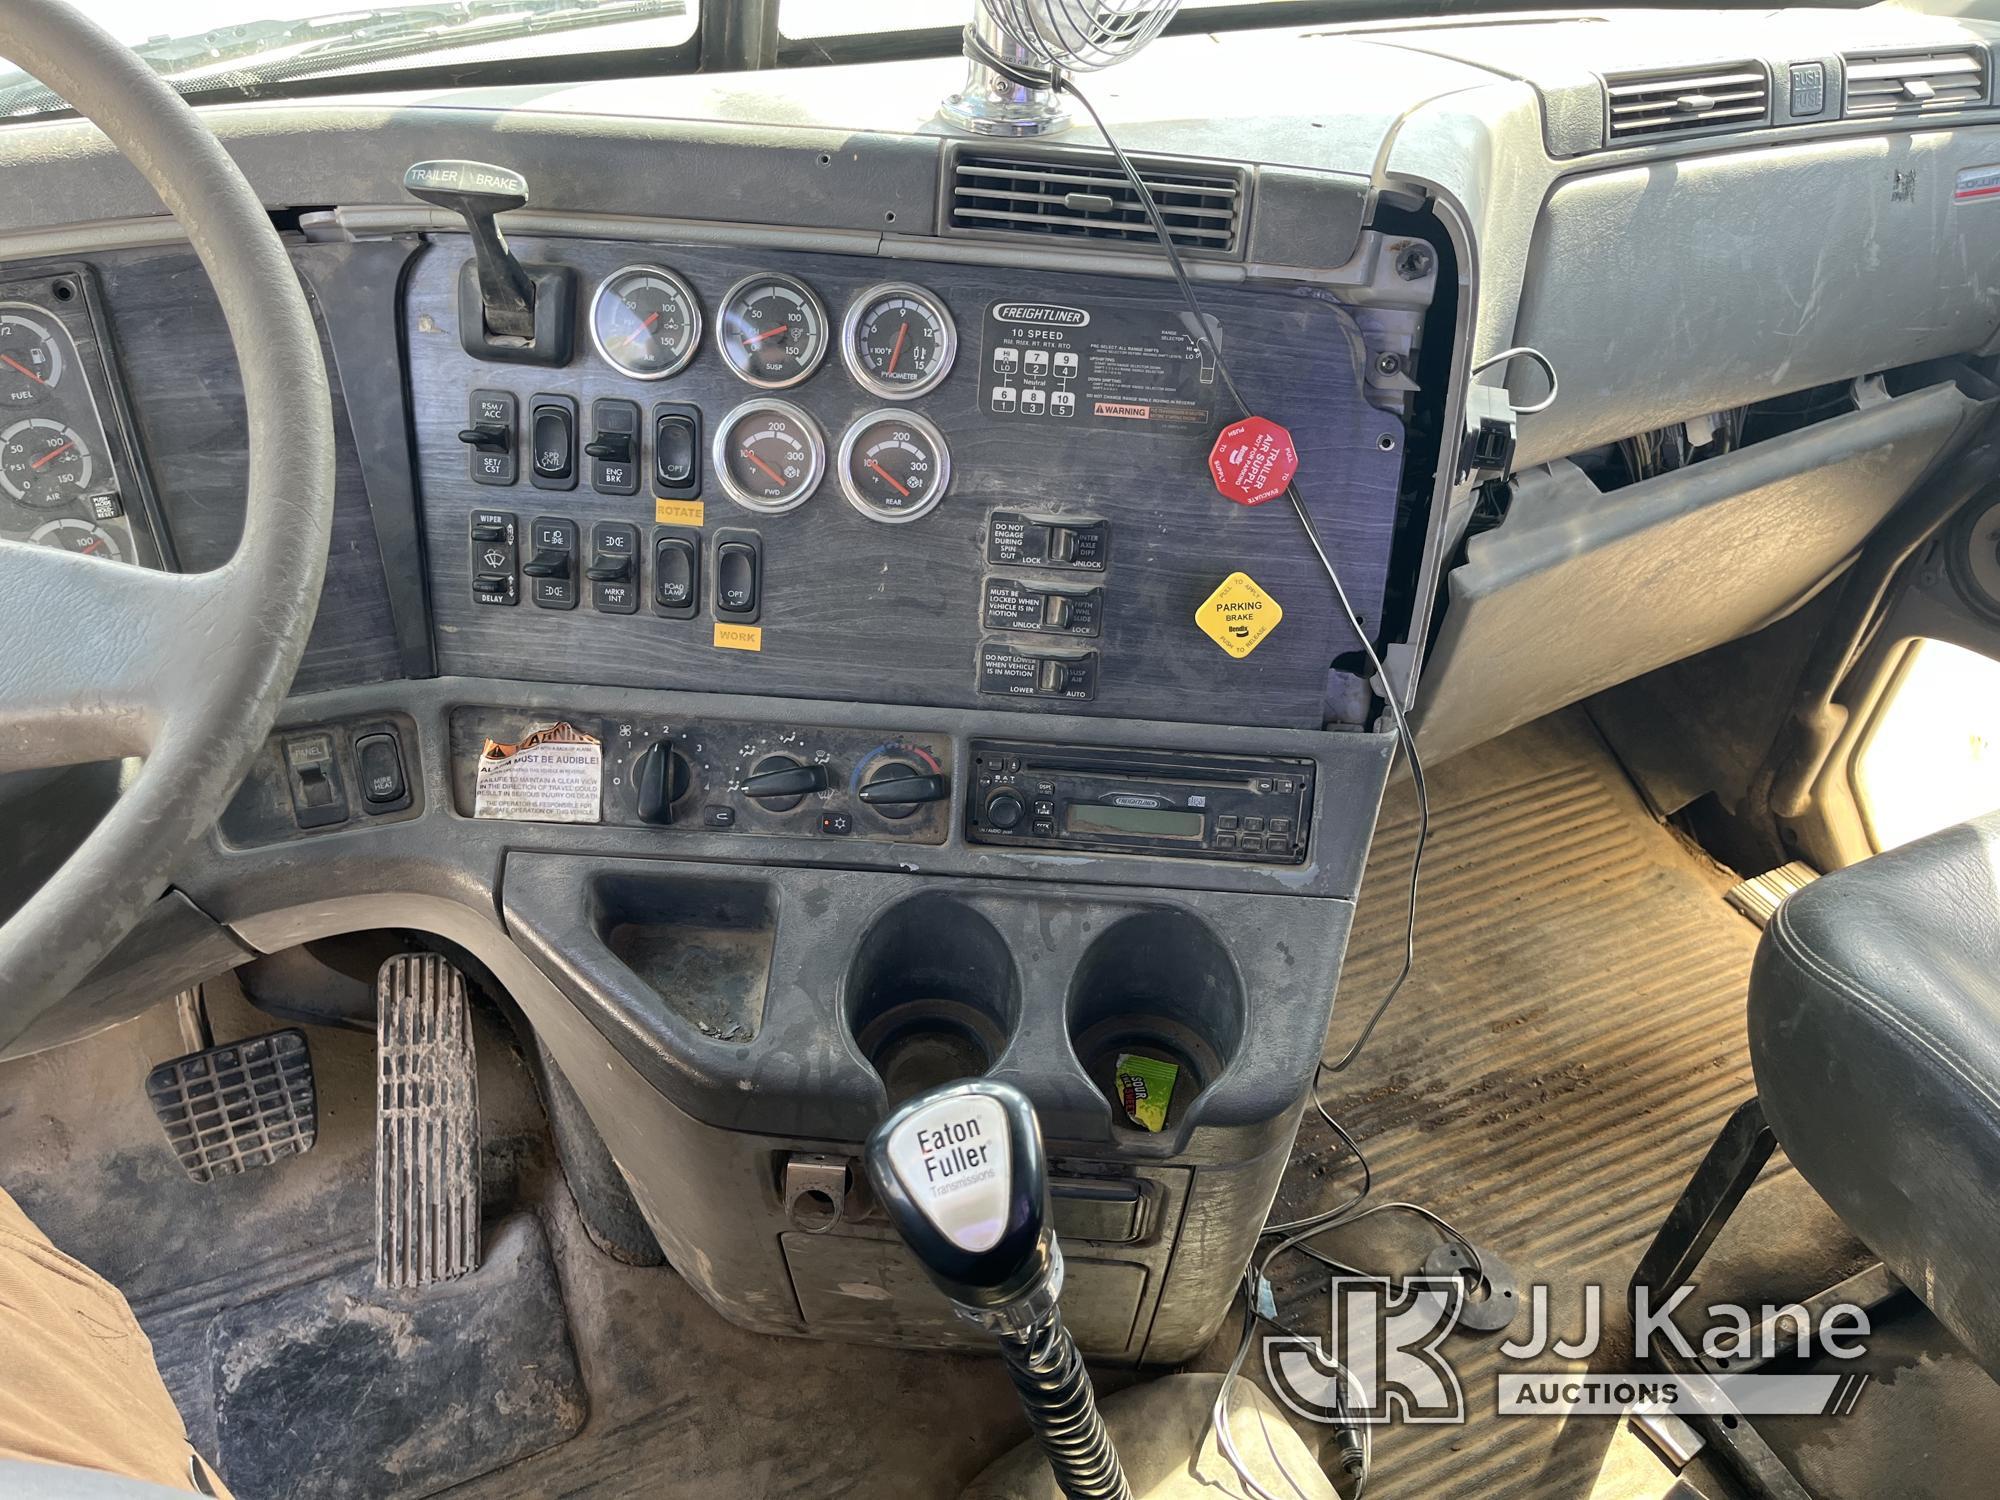 (Hawk Point, MO) 2007 Freightliner Columbia 120 Tractor Truck Runs & Moves, PTO Engages)(Minor Body